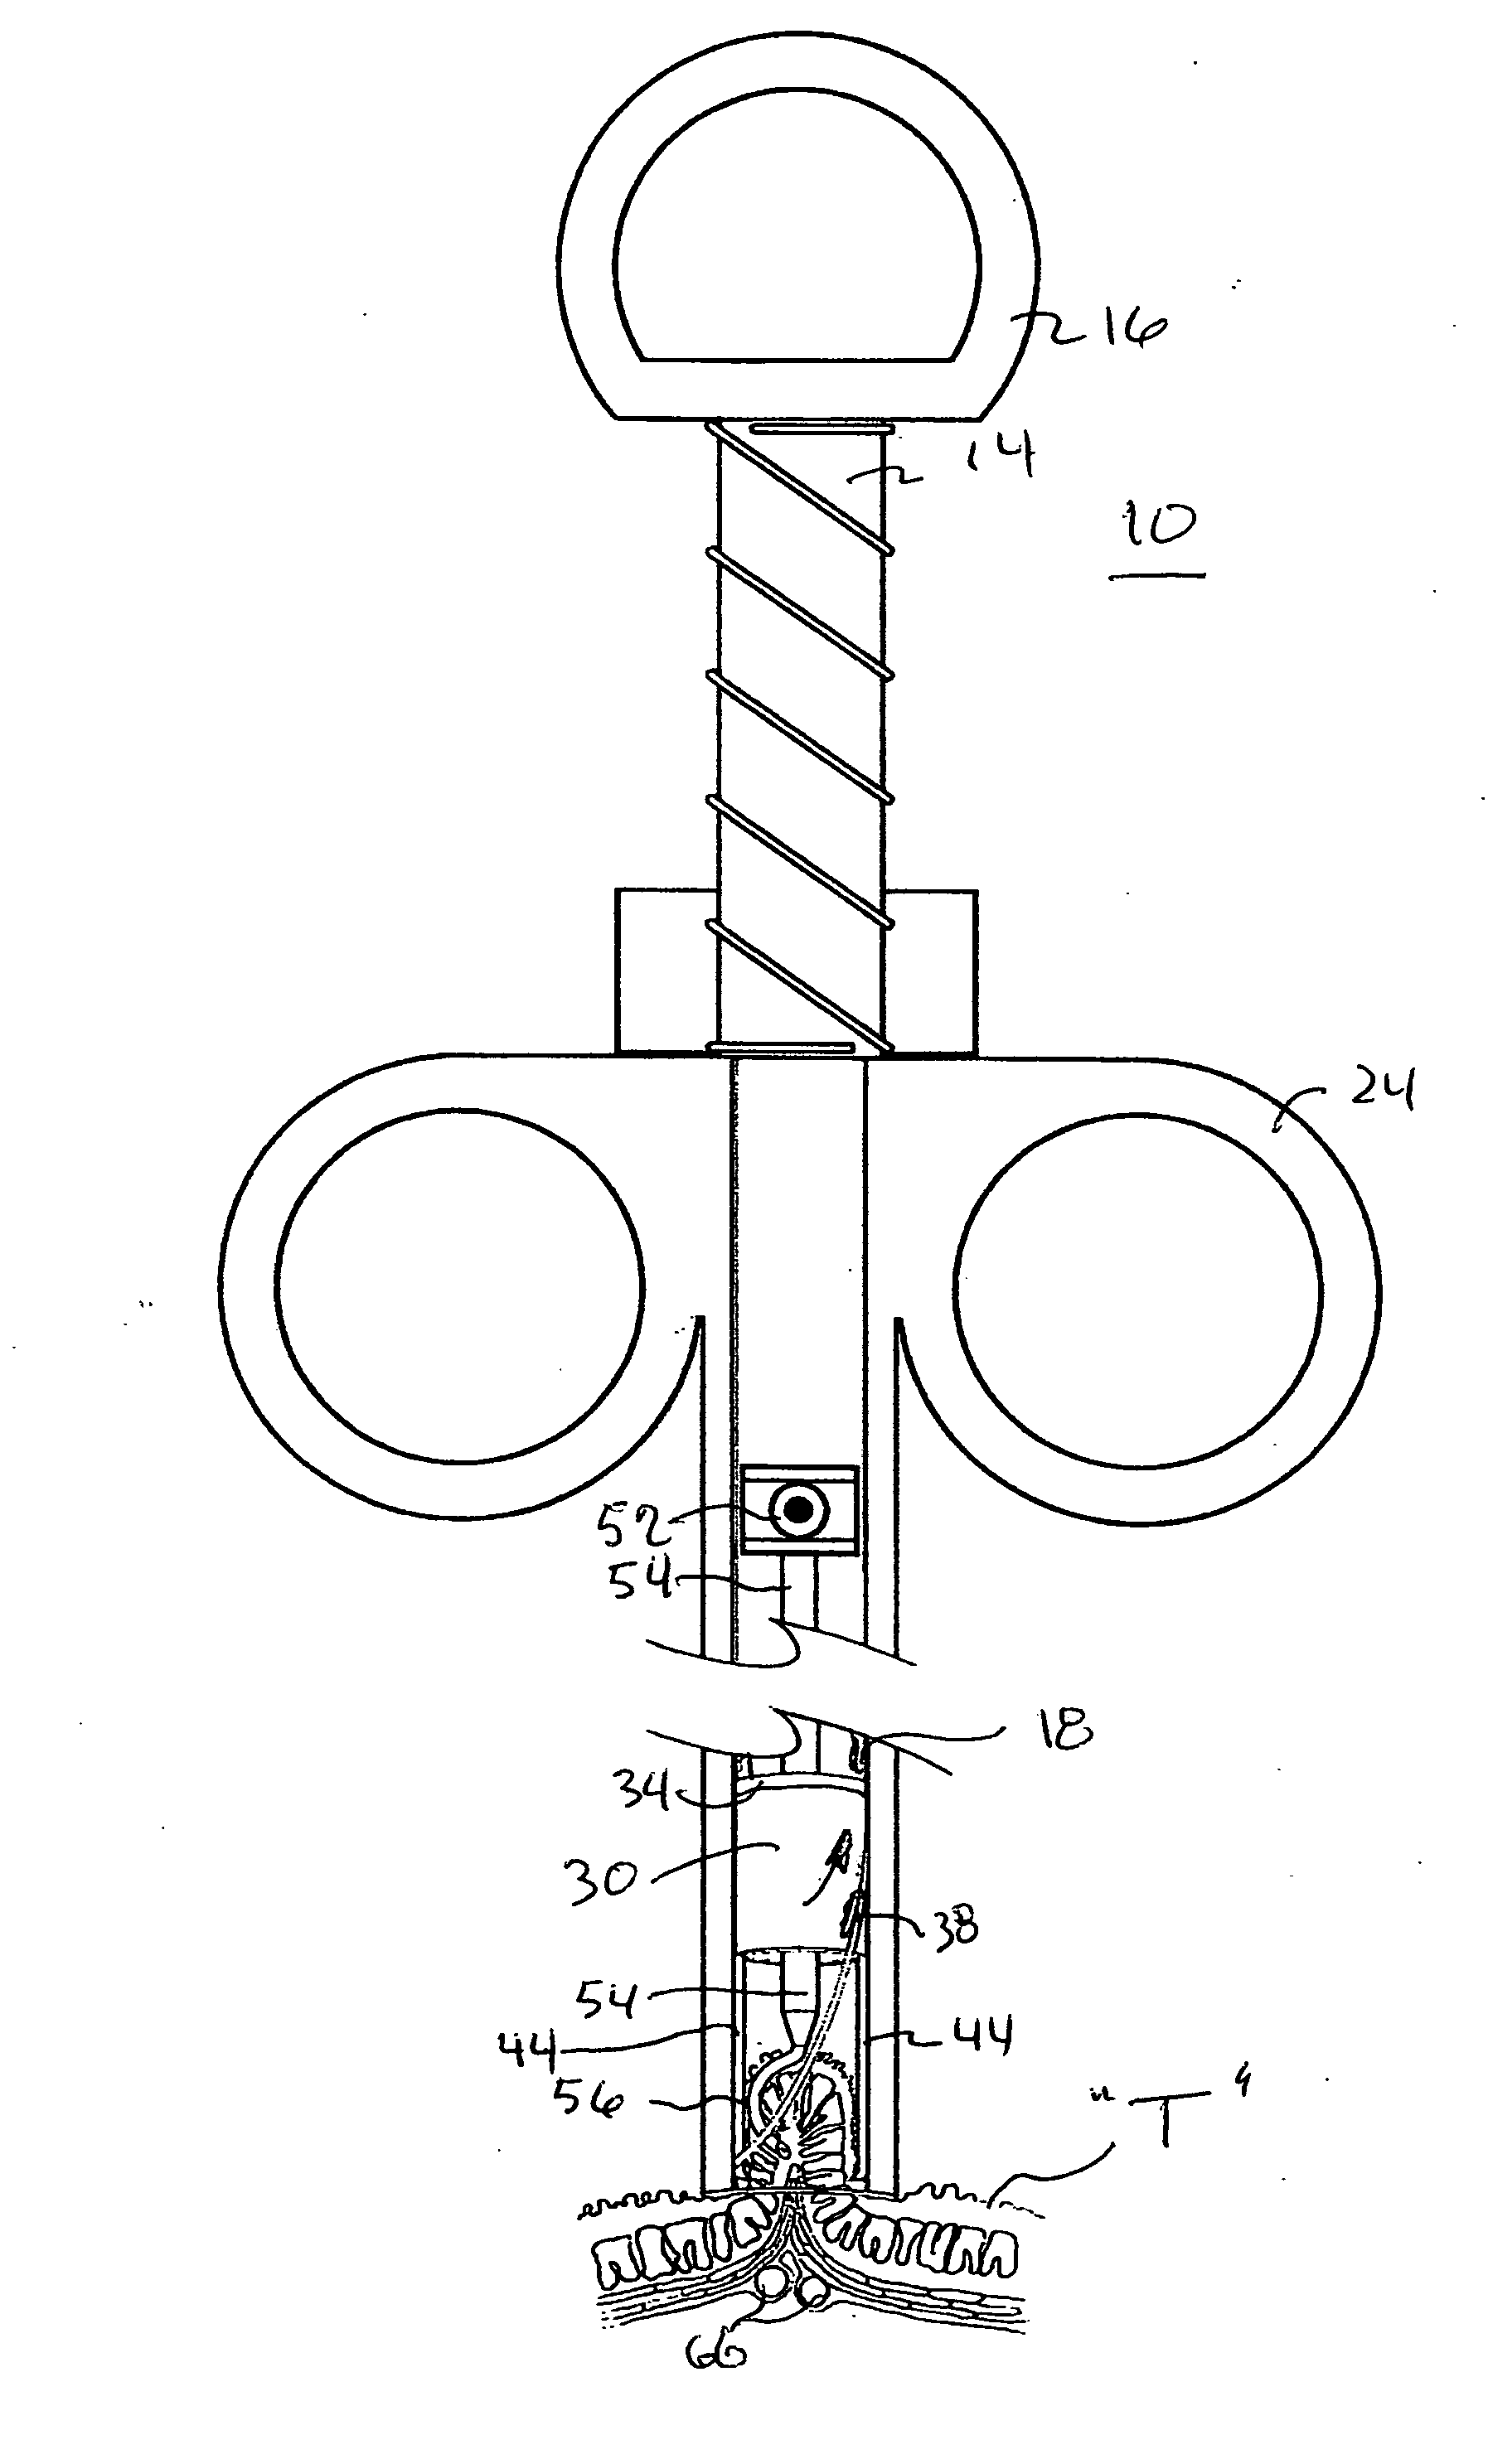 Apparatus and method of safe placement of bulking materials for gastroscopic vagus nerve bulking to reduce appetite and to effect weight loss